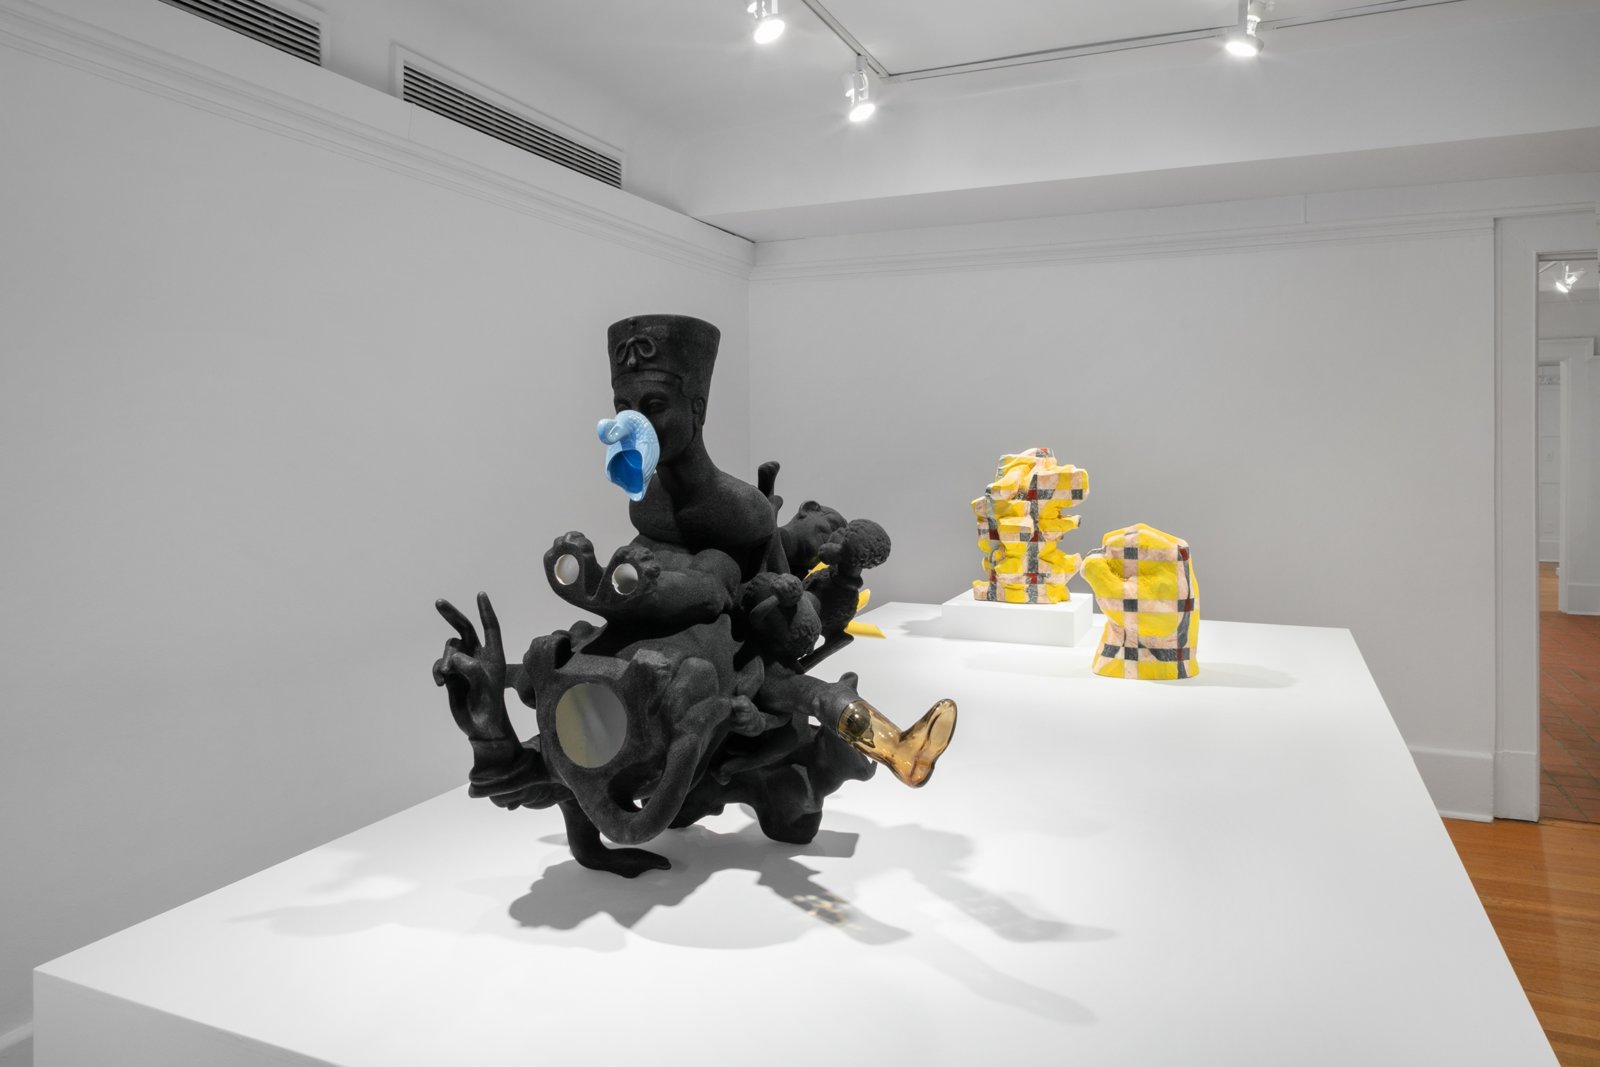 Valérie Blass, Comme dans l’an quarante, 2011, ceramic objects, glass, flocking, 30 x 27 x 27 in. (77 x 69 x 67 cm). Installation view, The Mime, the Model and the Dupe, Oakville Galleries, Oakville, 2019